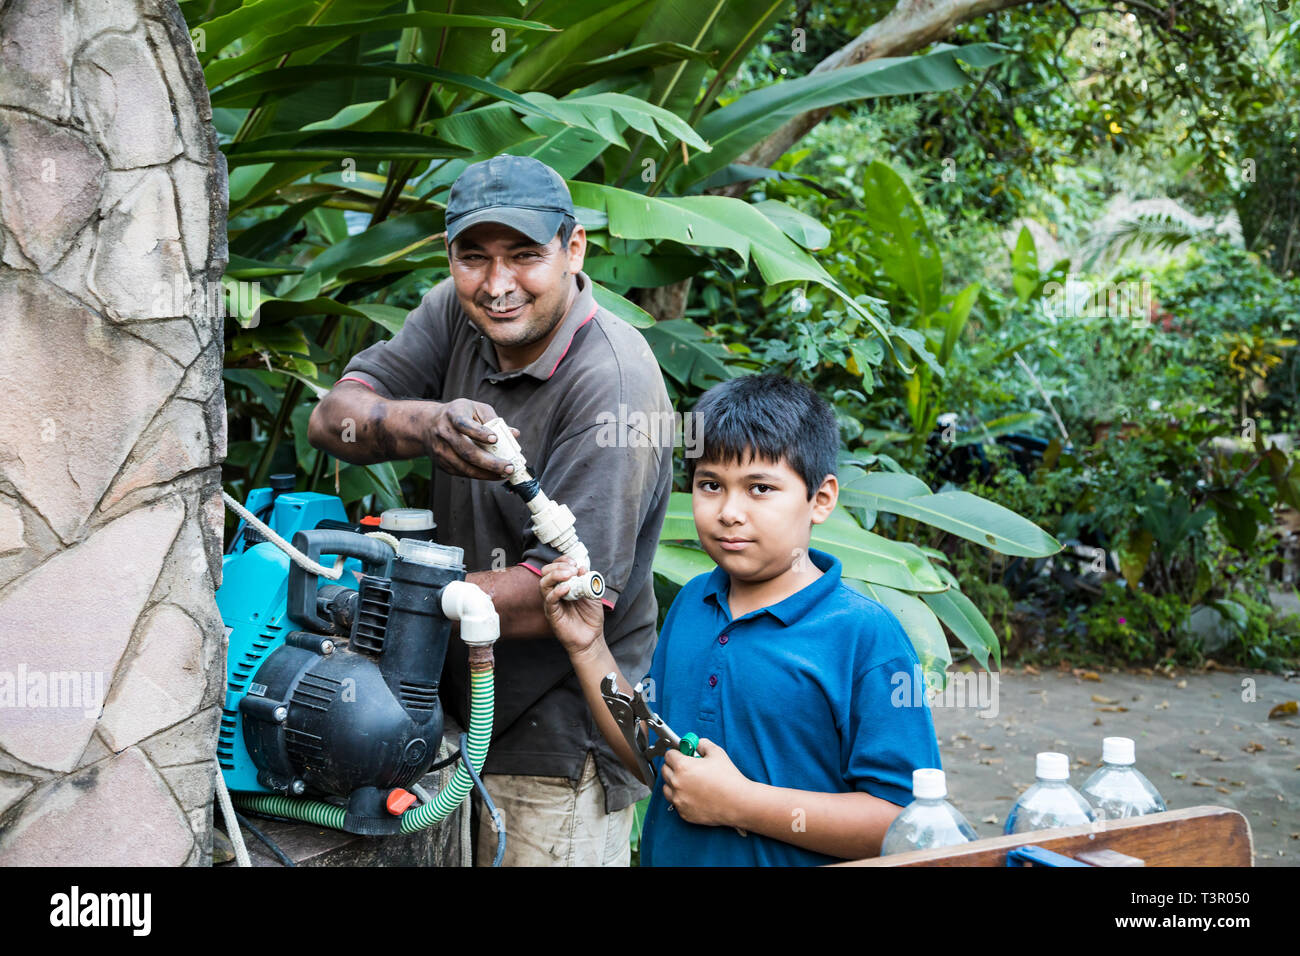 Colonia Independencia, Paraguay - April 17, 2018: A Paraguayan boy helps his father repair a pump. Stock Photo